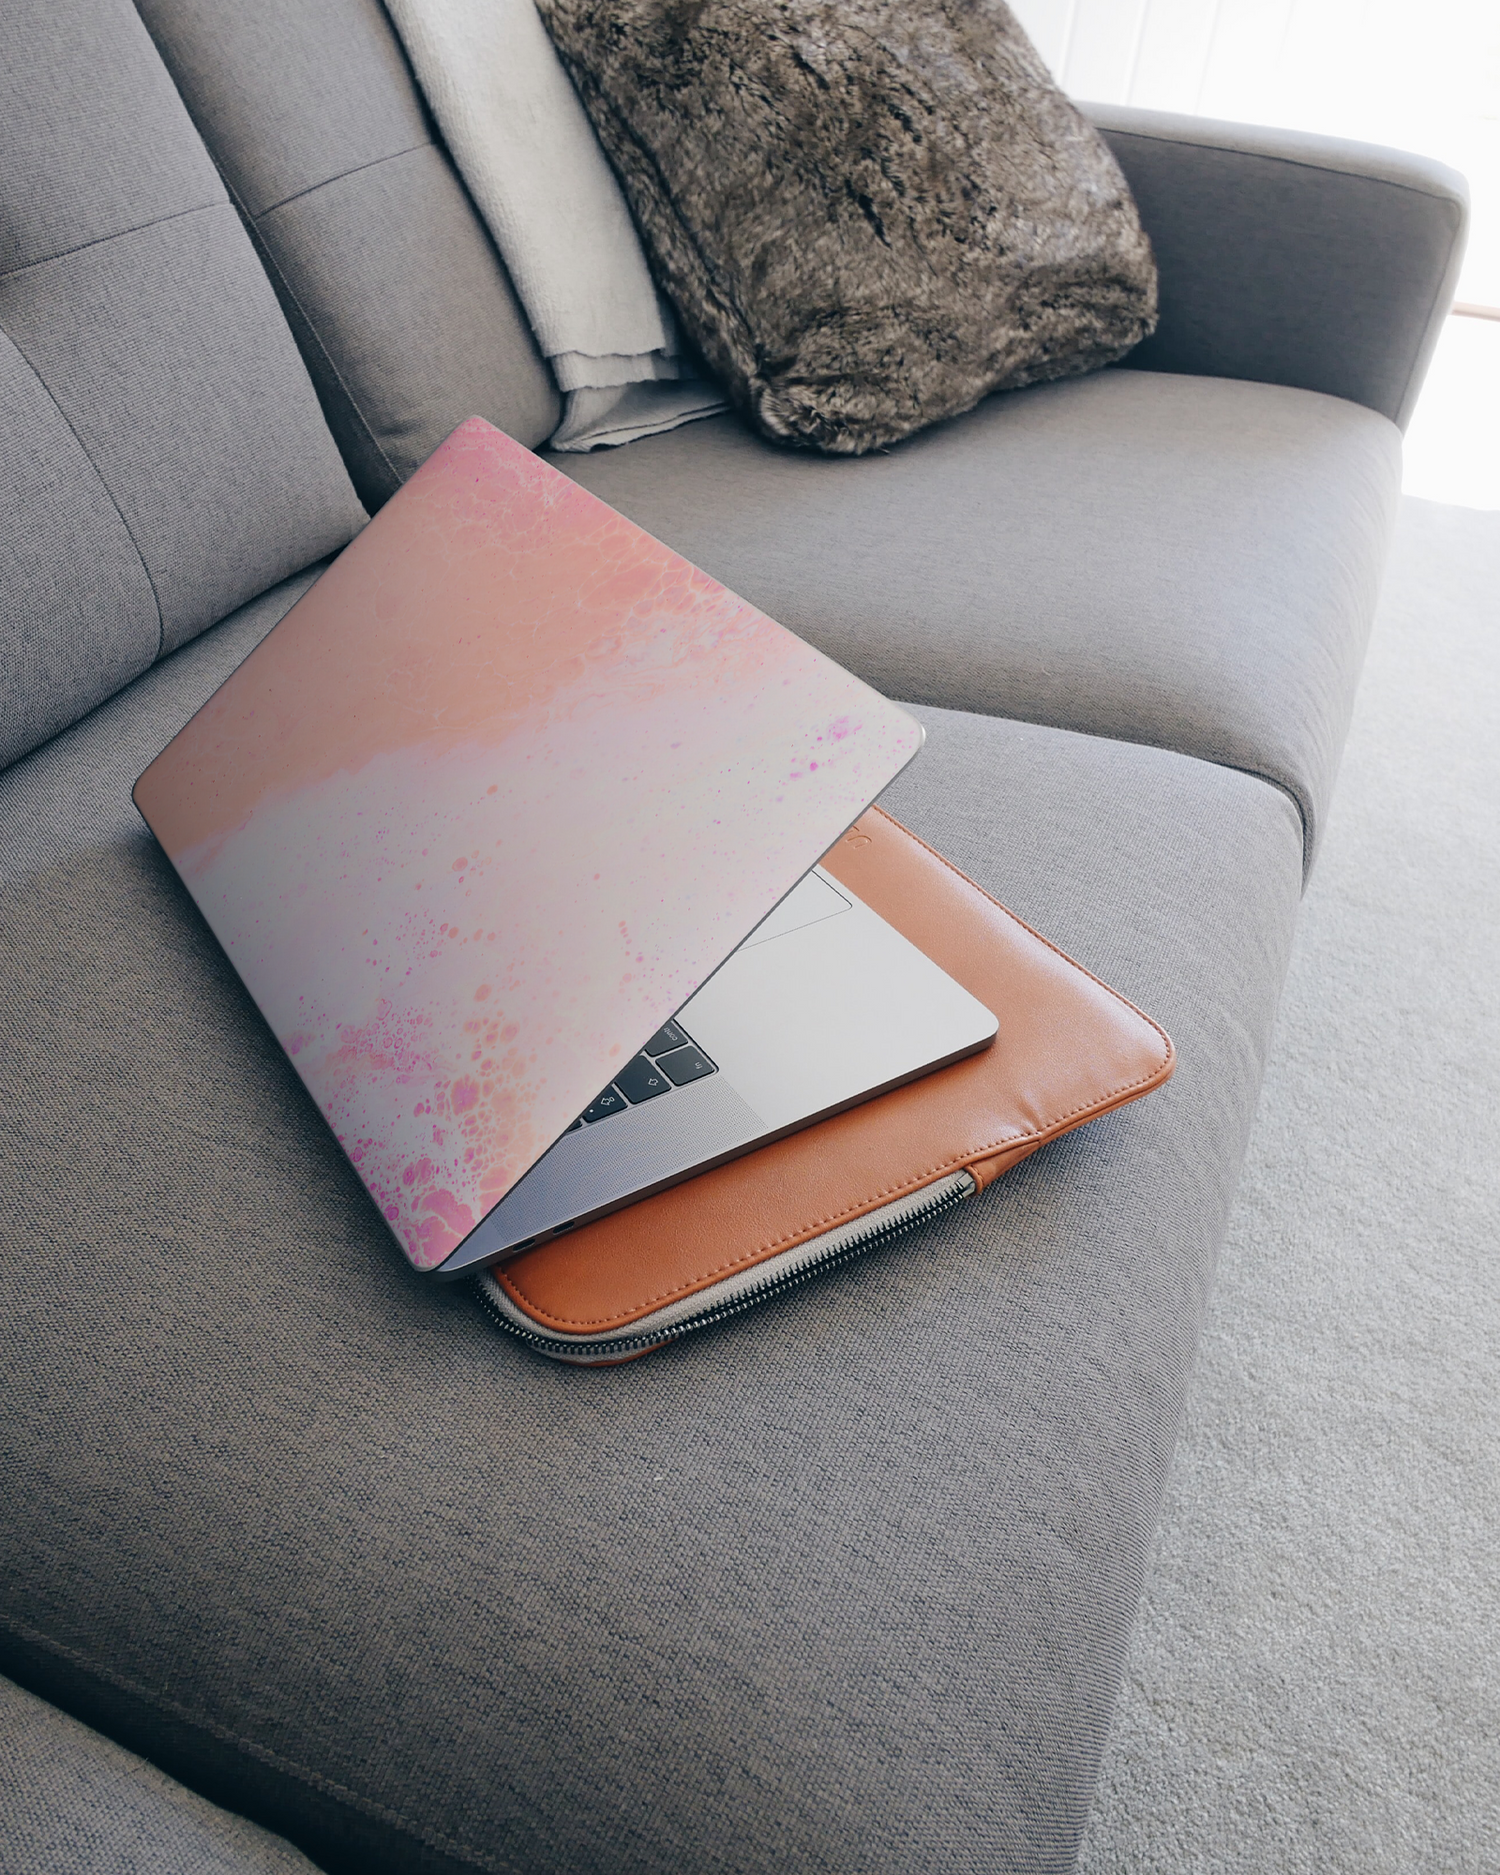 Peaches & Cream Marble Laptop Skin for 15 inch Apple MacBooks on a couch